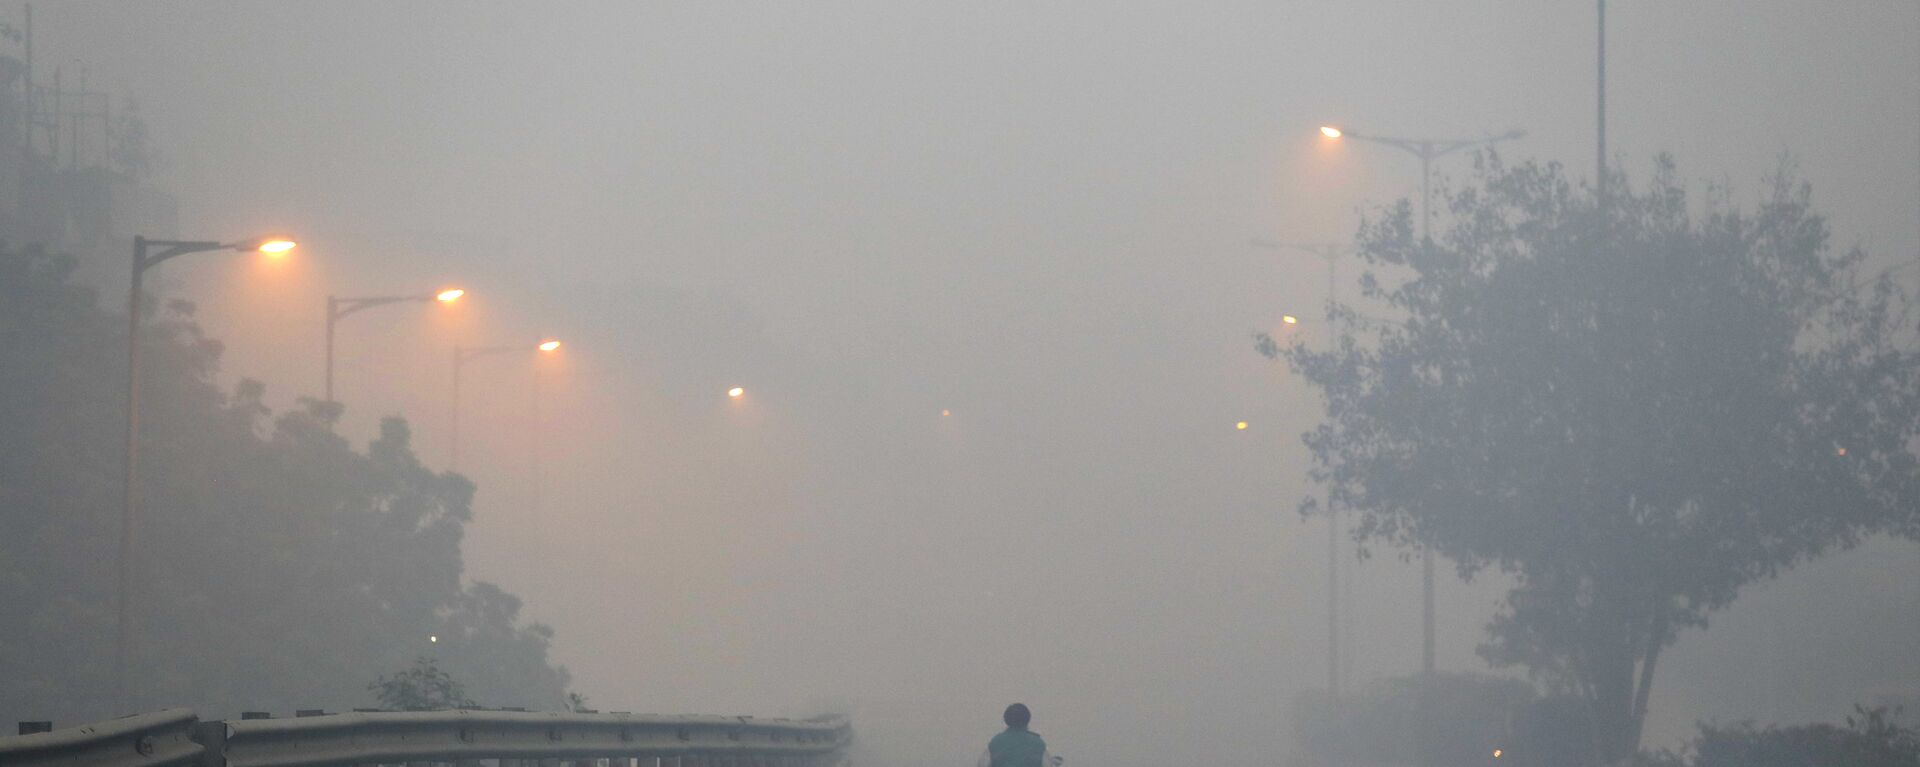 A man rides a scooter on a road enveloped by smoke and smog, on the morning following Diwali festival in New Delhi, India, Monday, Oct. 31, 2016.  - Sputnik International, 1920, 14.06.2022